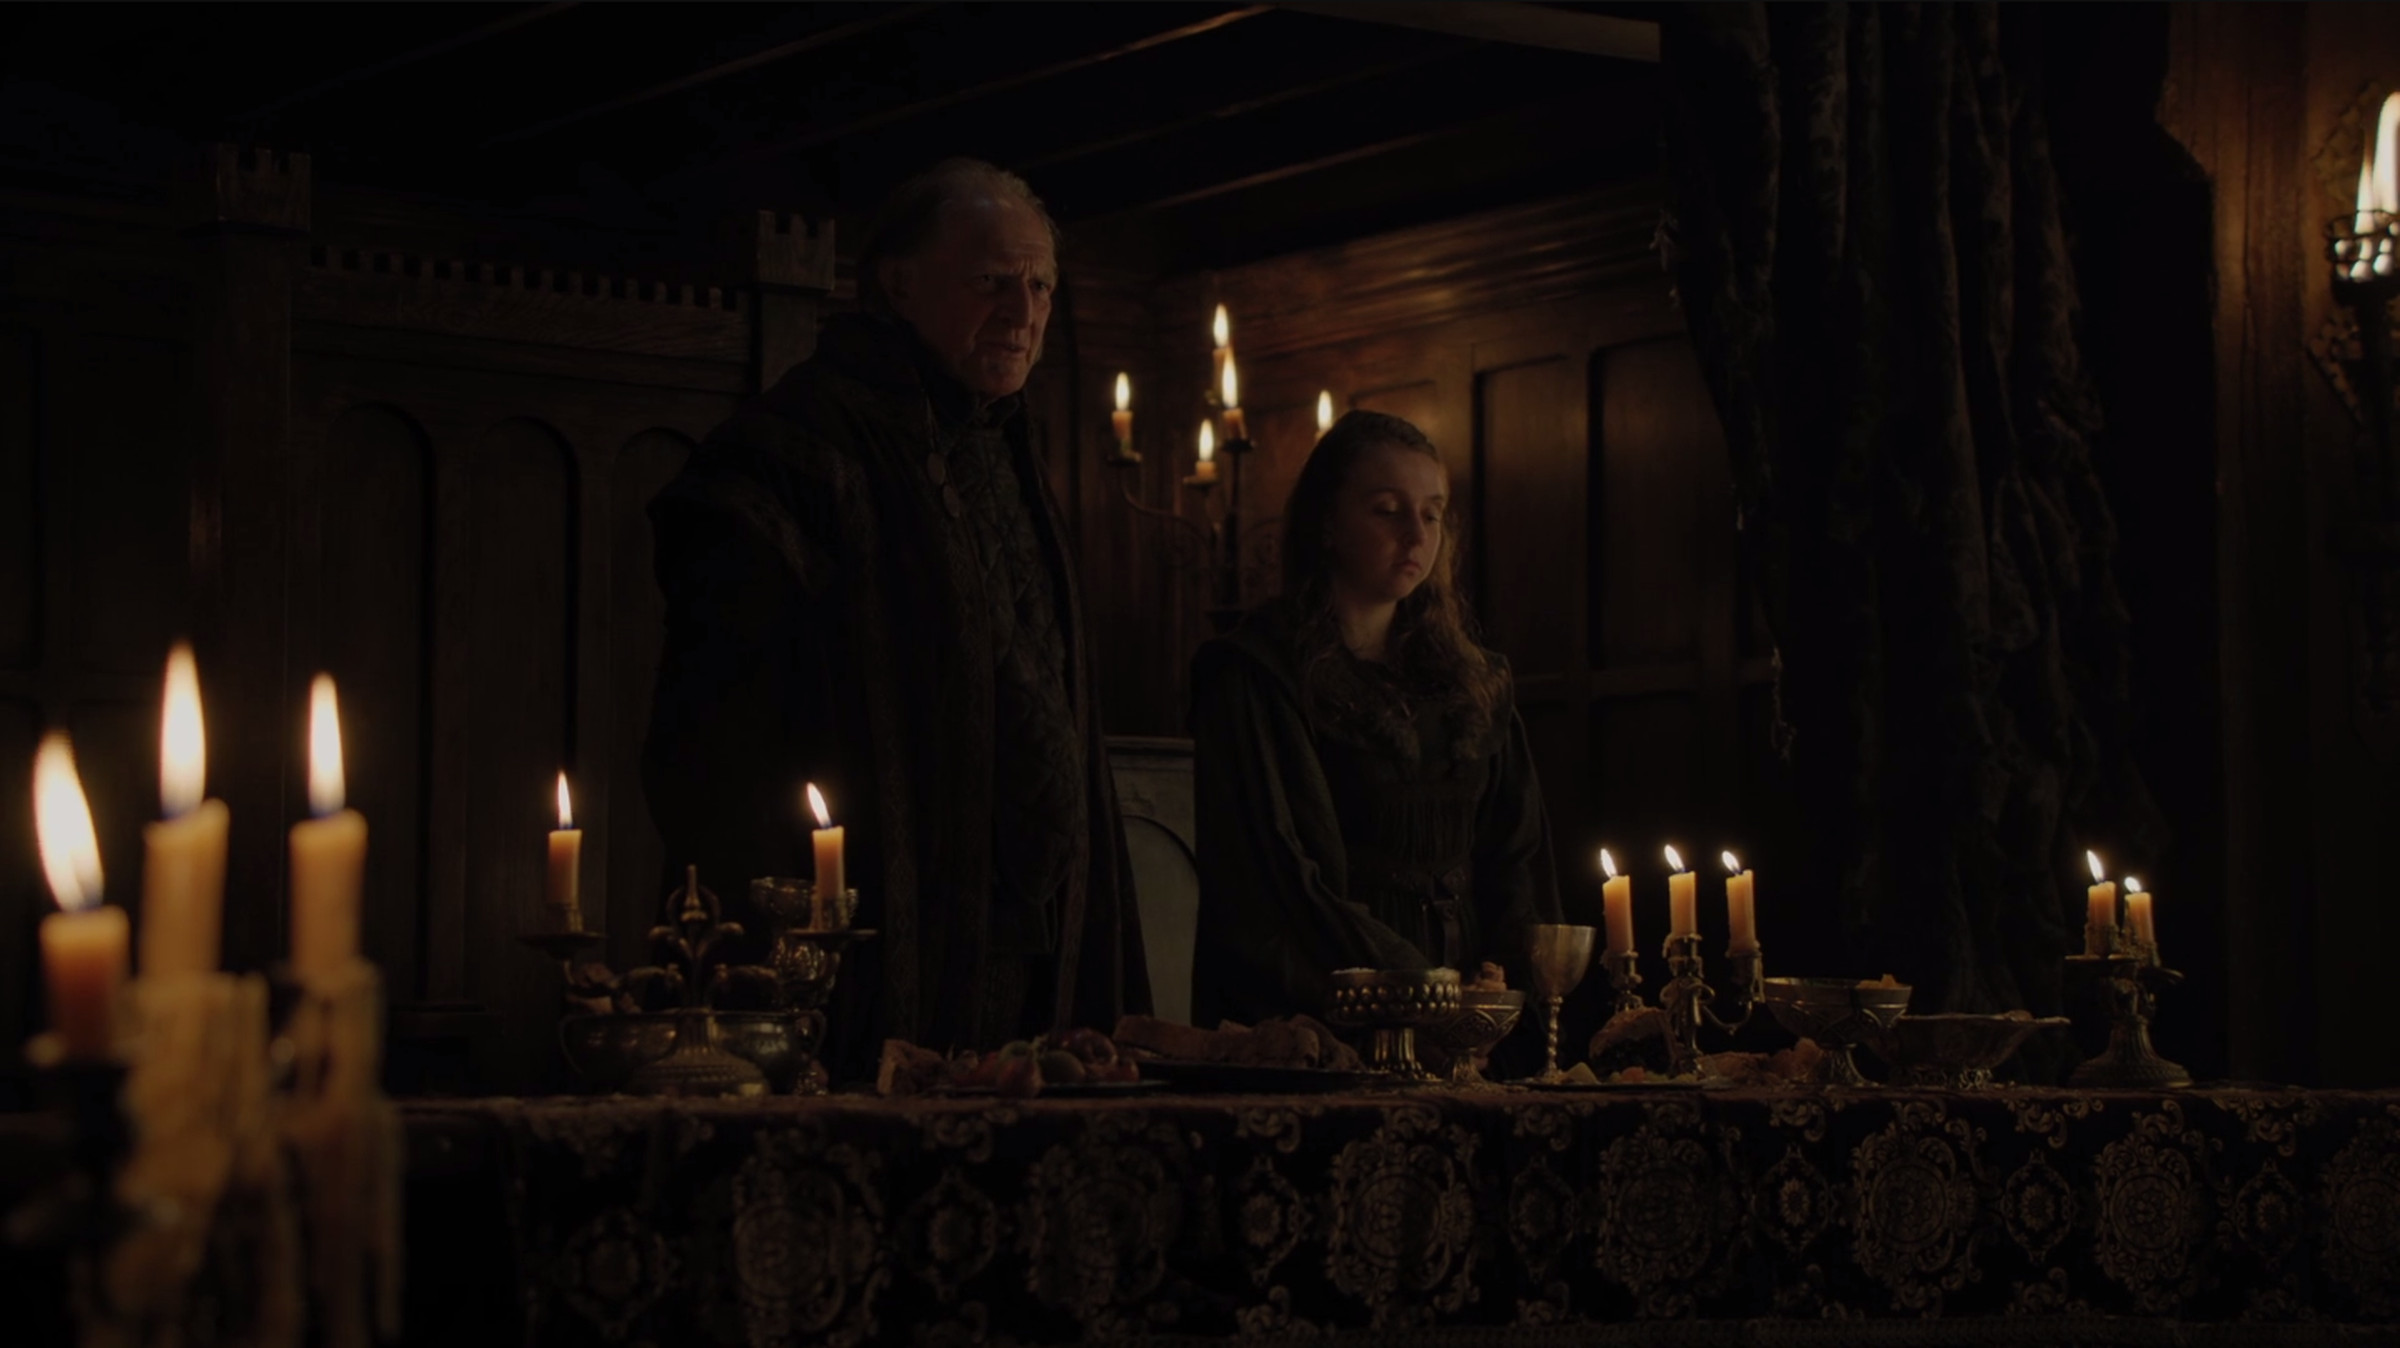 Arya as Walder Frey holds a suspicious second feast in the same night.